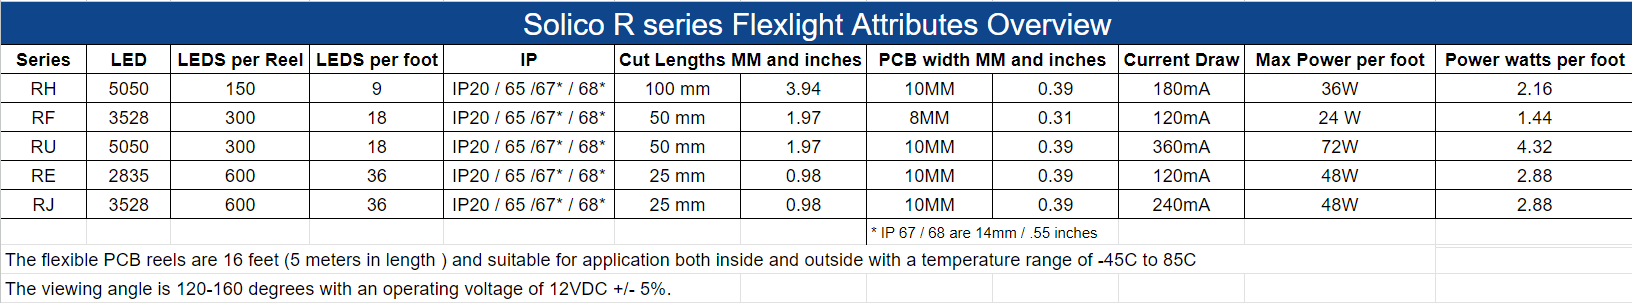 flexlights table pgn